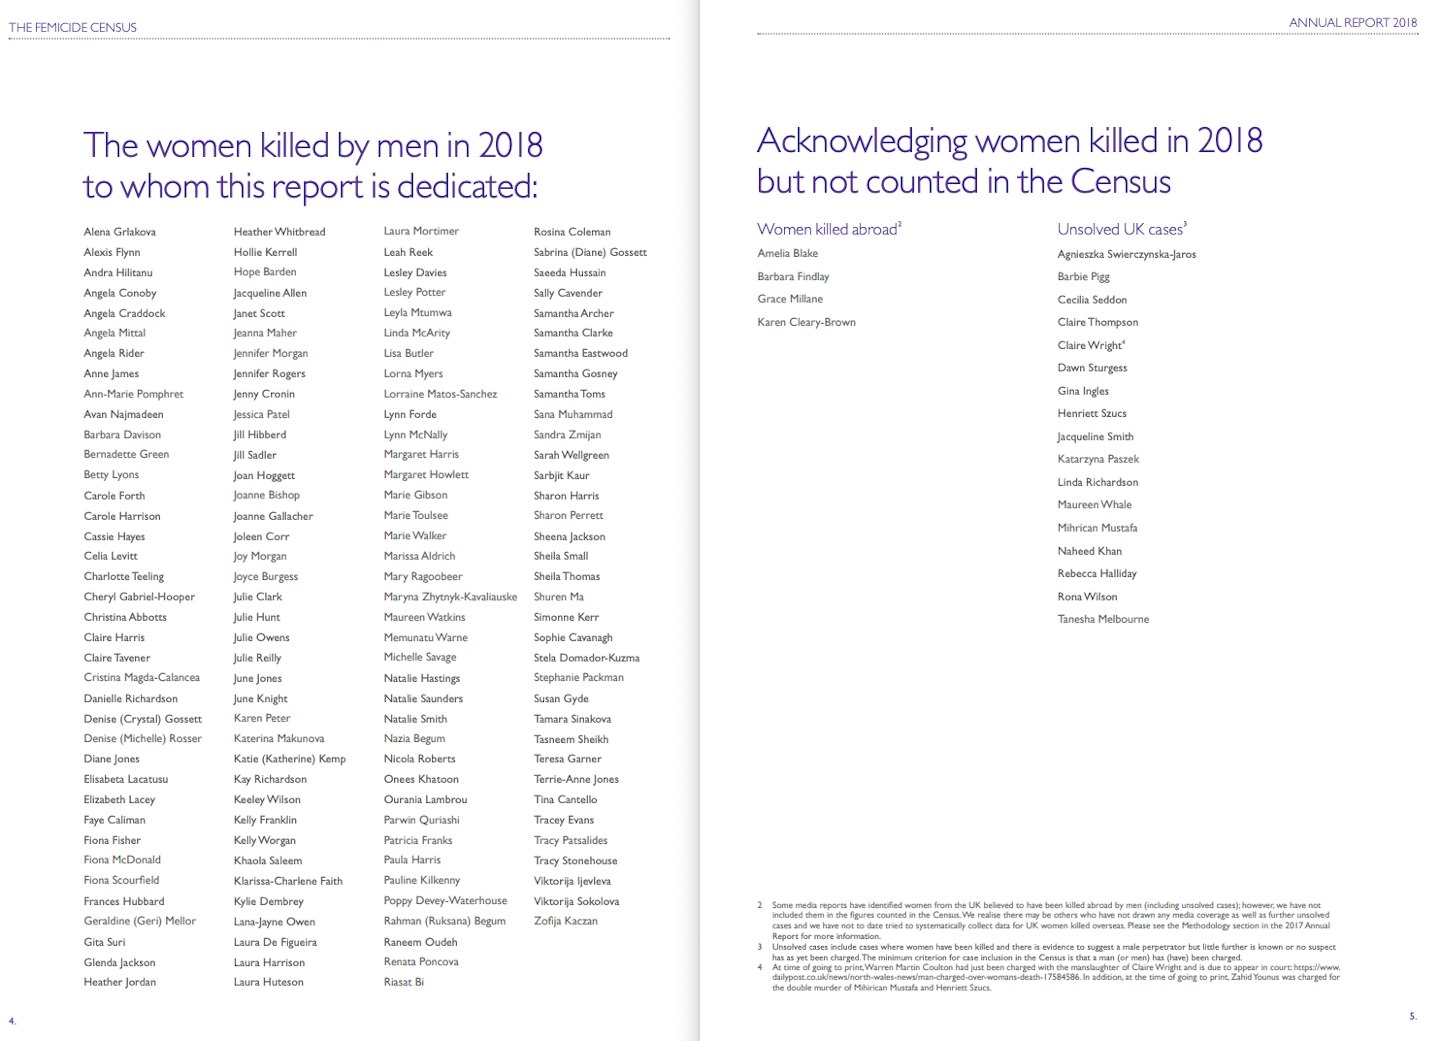 The Femicide Census is dedicated to the women killed by men in 2018